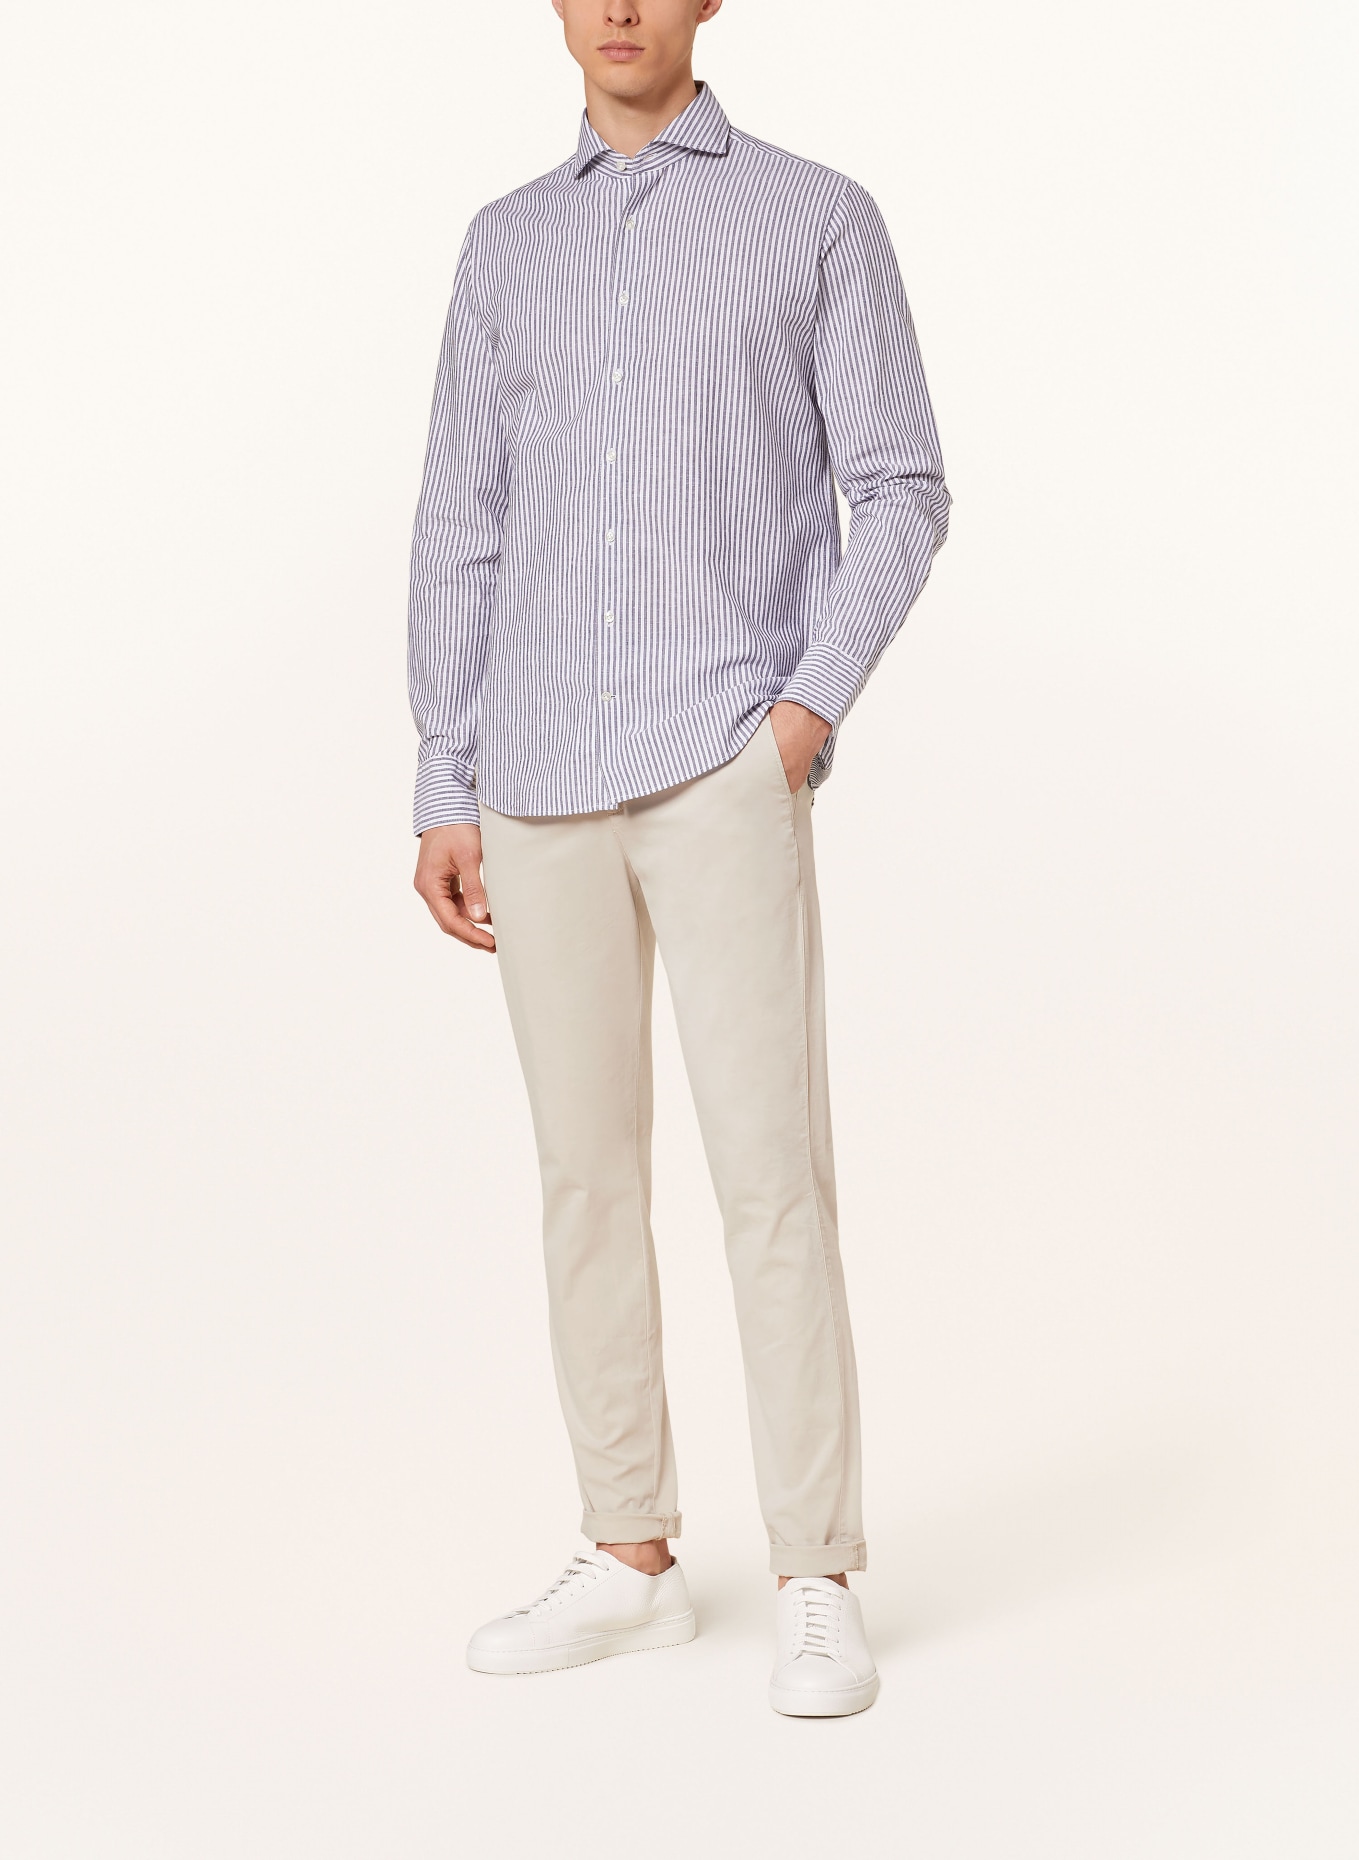 STROKESMAN'S Shirt regular fit with linen, Color: DARK BLUE/ WHITE (Image 2)